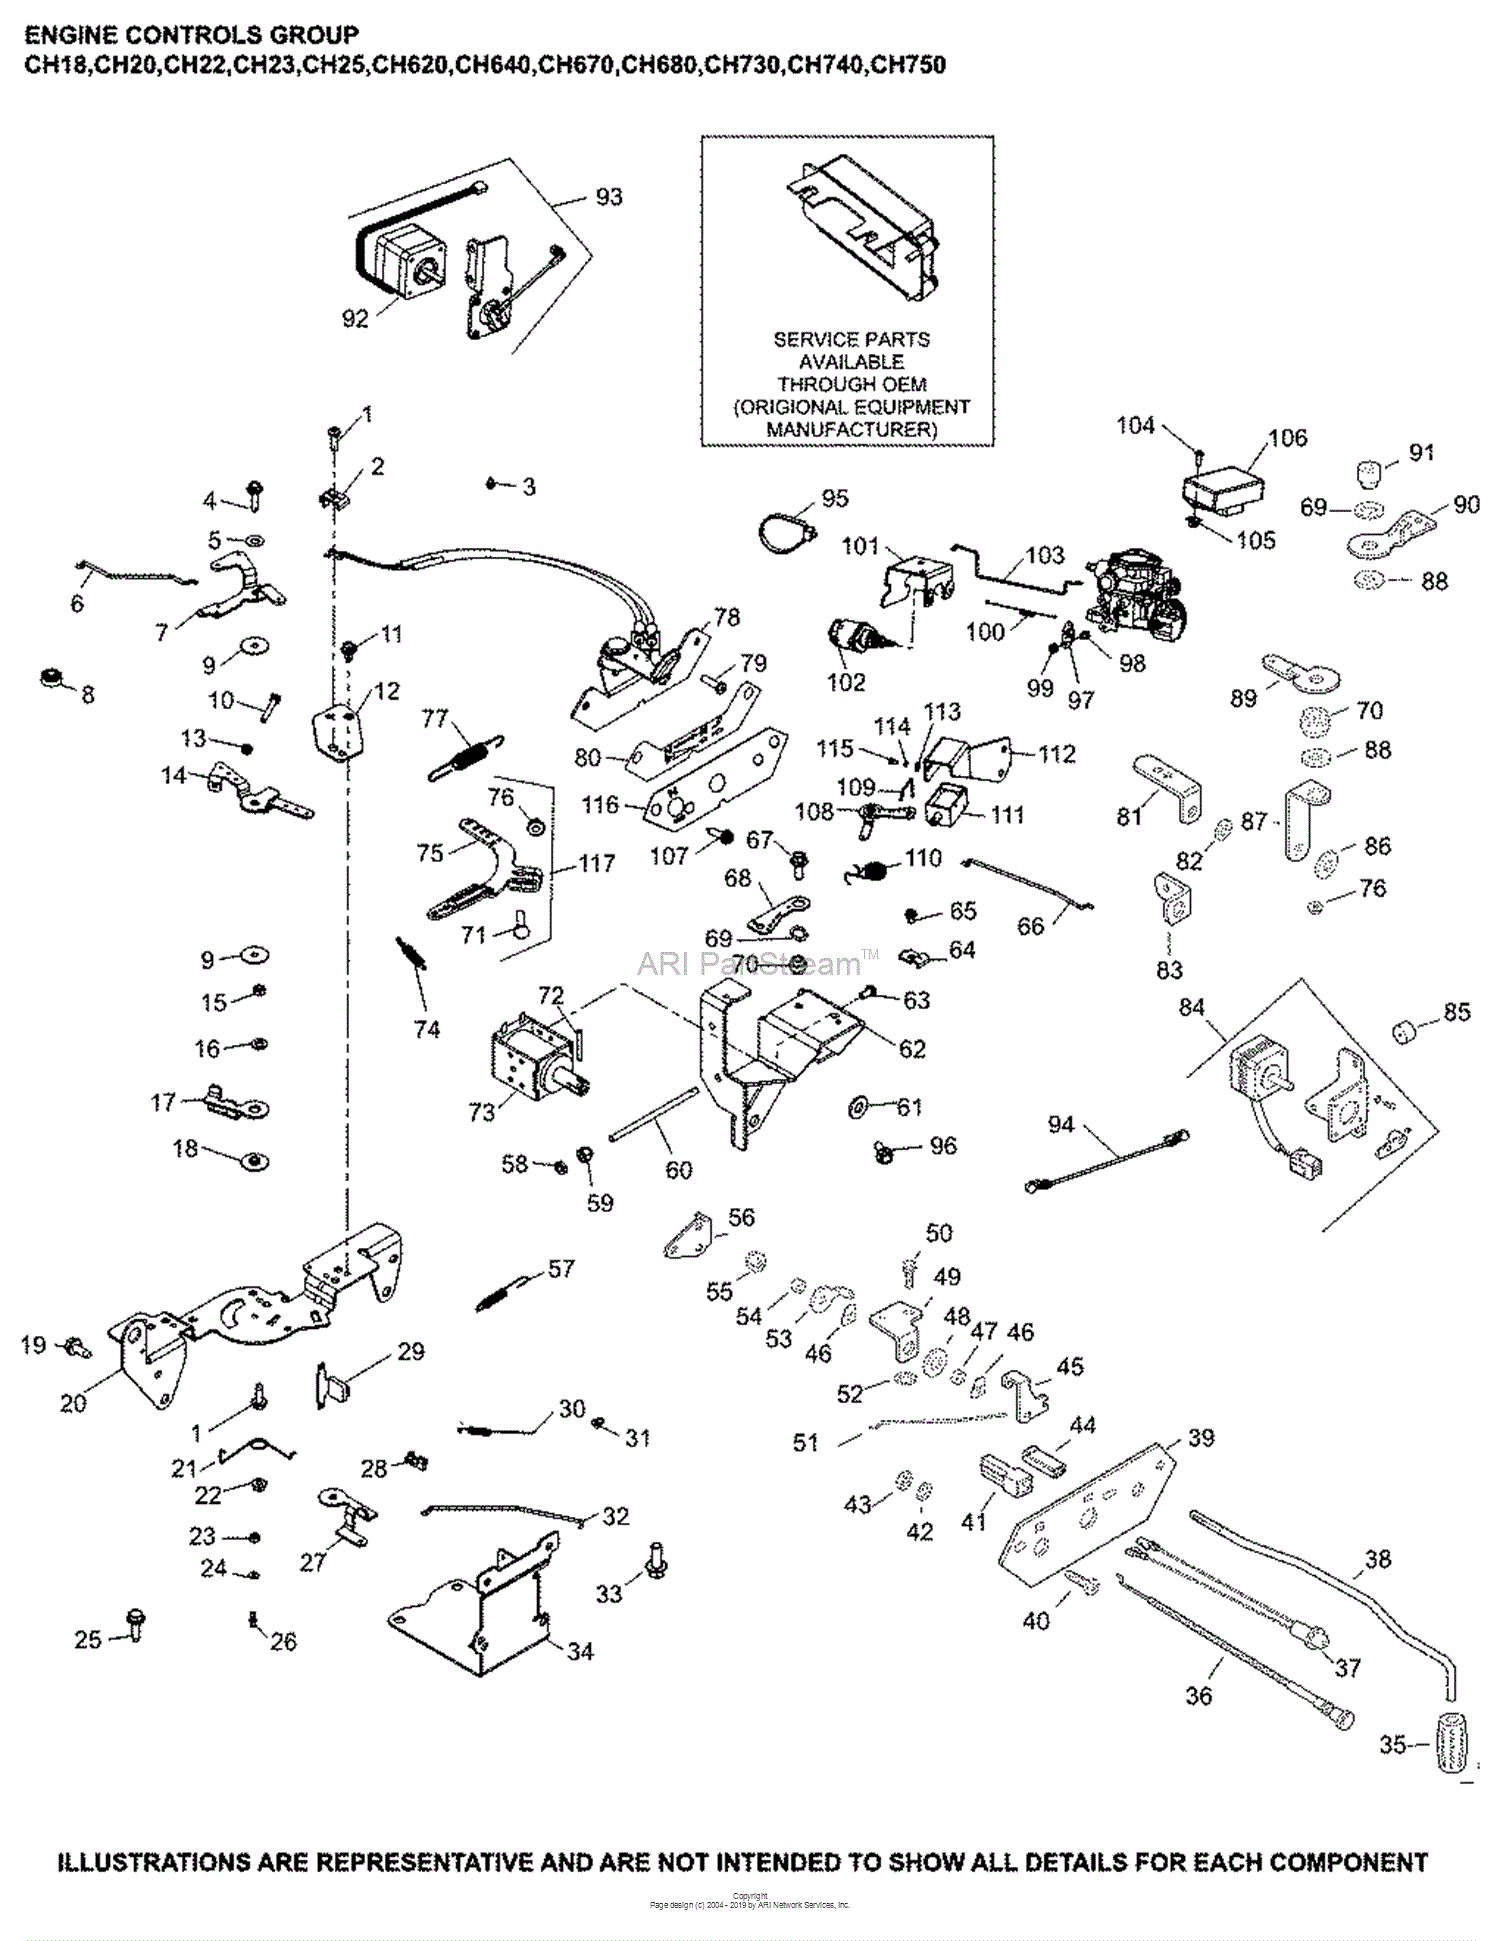 Kohler CH750-3074 DITCH WITCH 27 HP (20.1 kW) Parts Diagram for Engine Controls 9-24-404 CH18-750